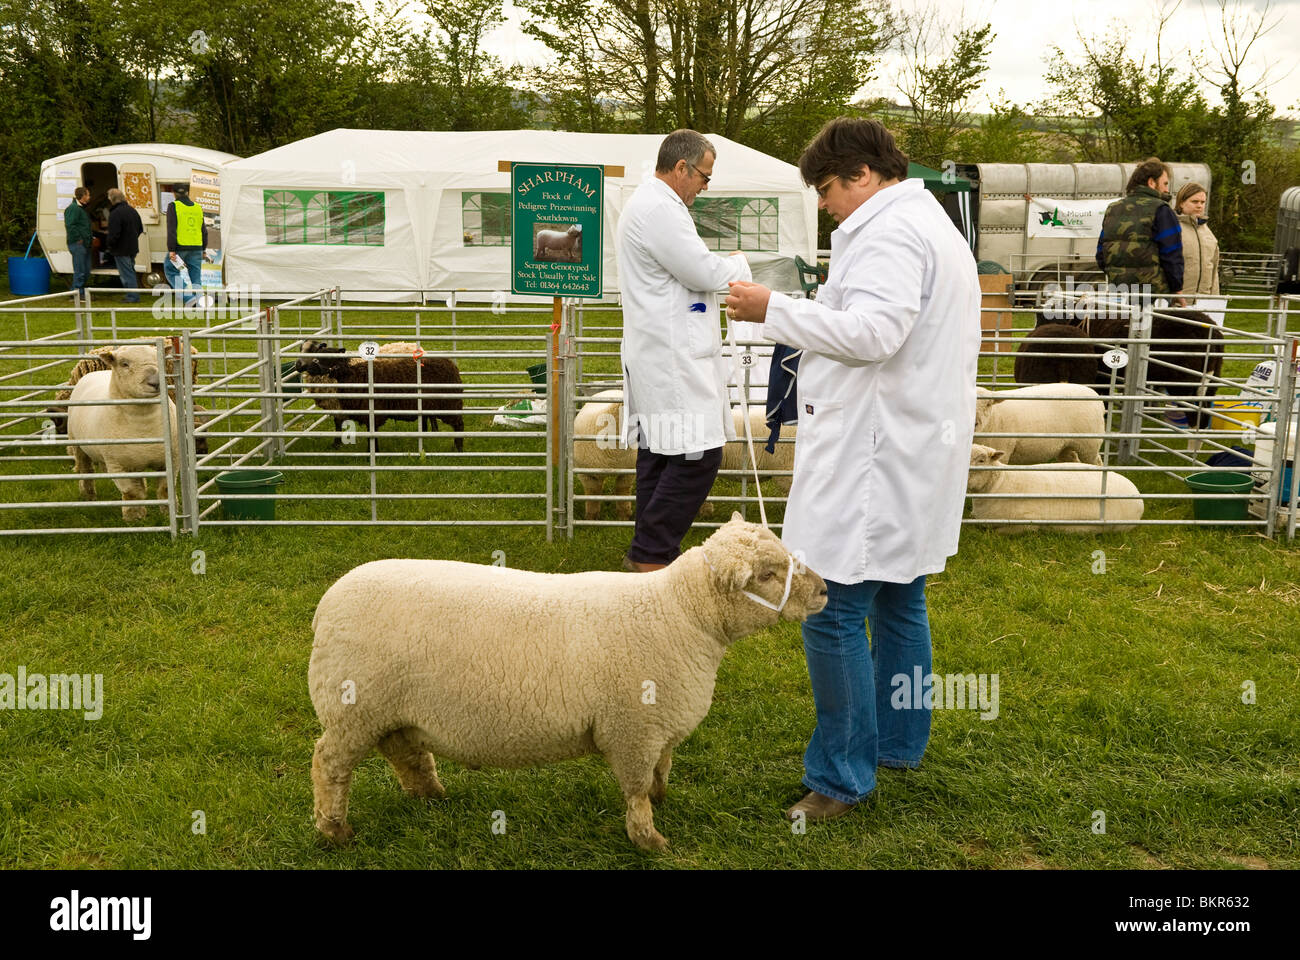 country or county show with farmers showing sheep, live stock pens in background Devon England UK 2010 Stock Photo